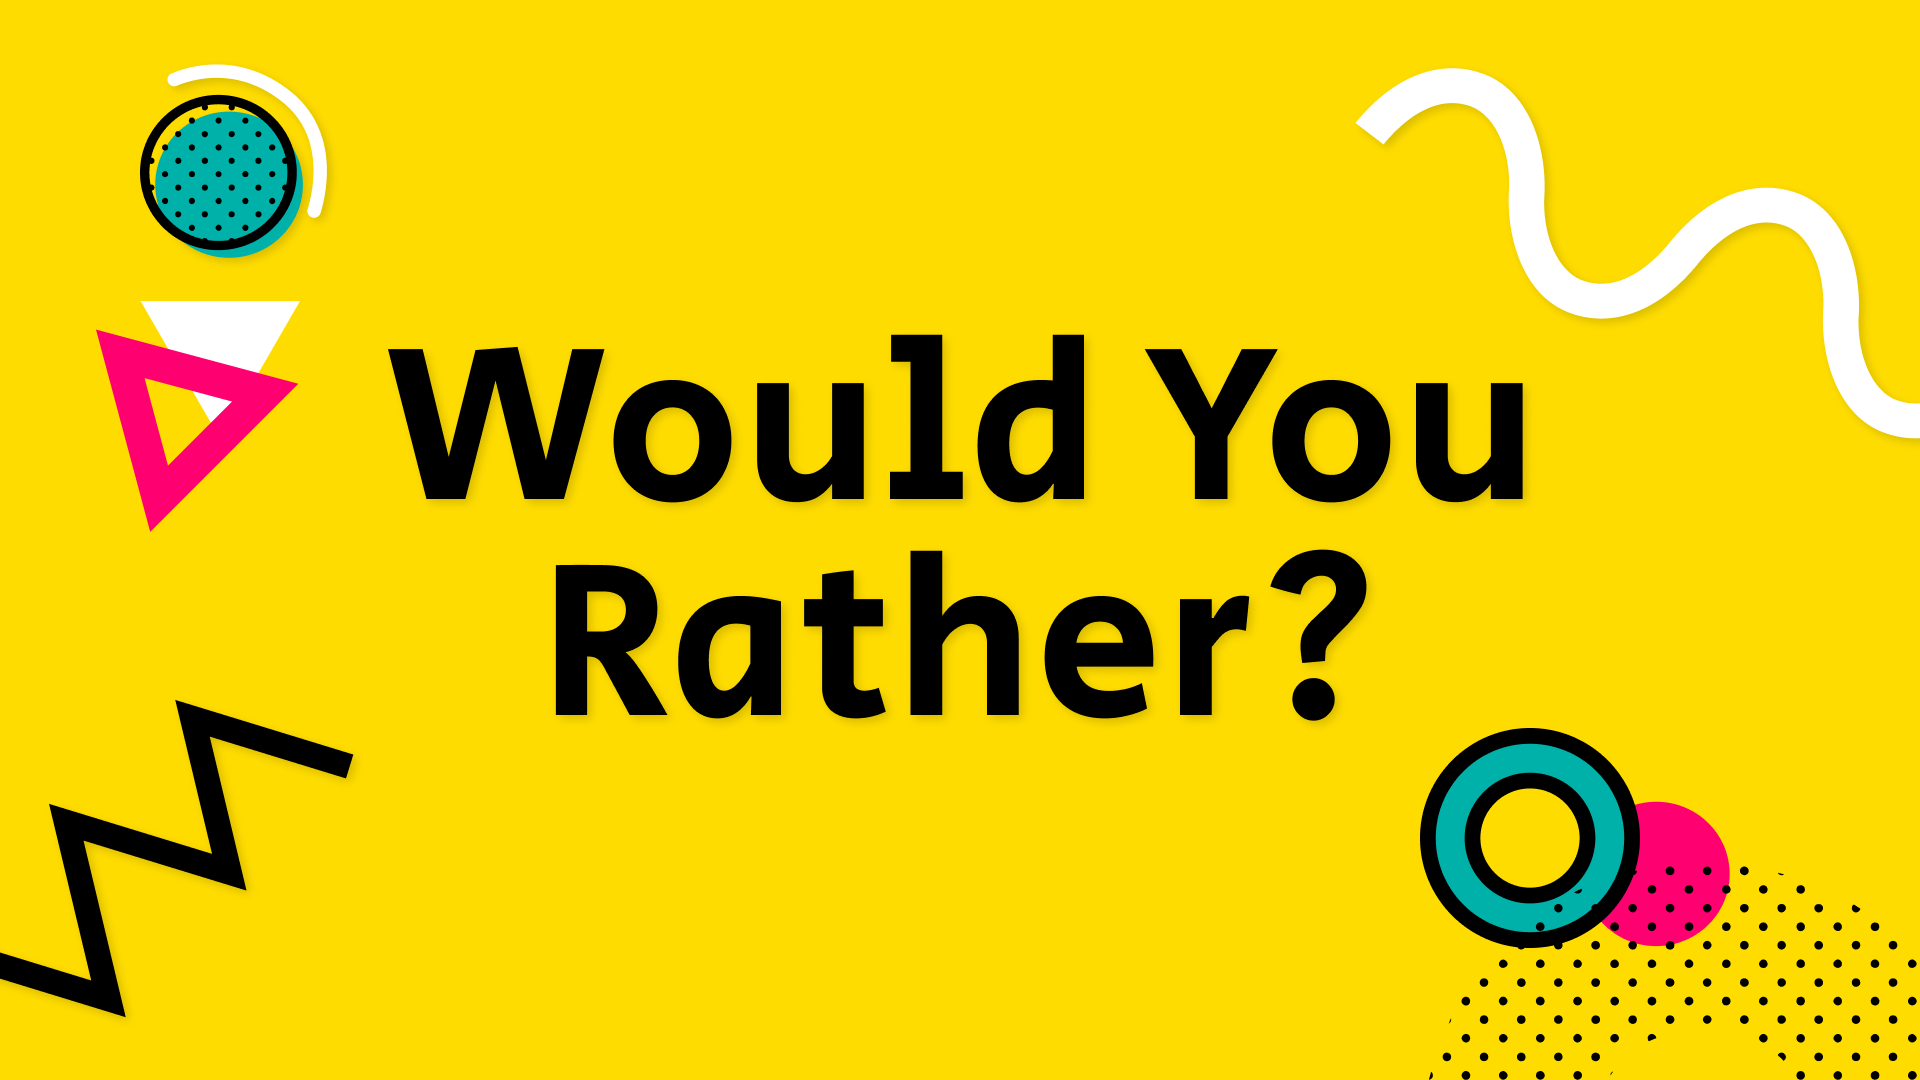 Would you rather questions you can print or scroll through on your phone!